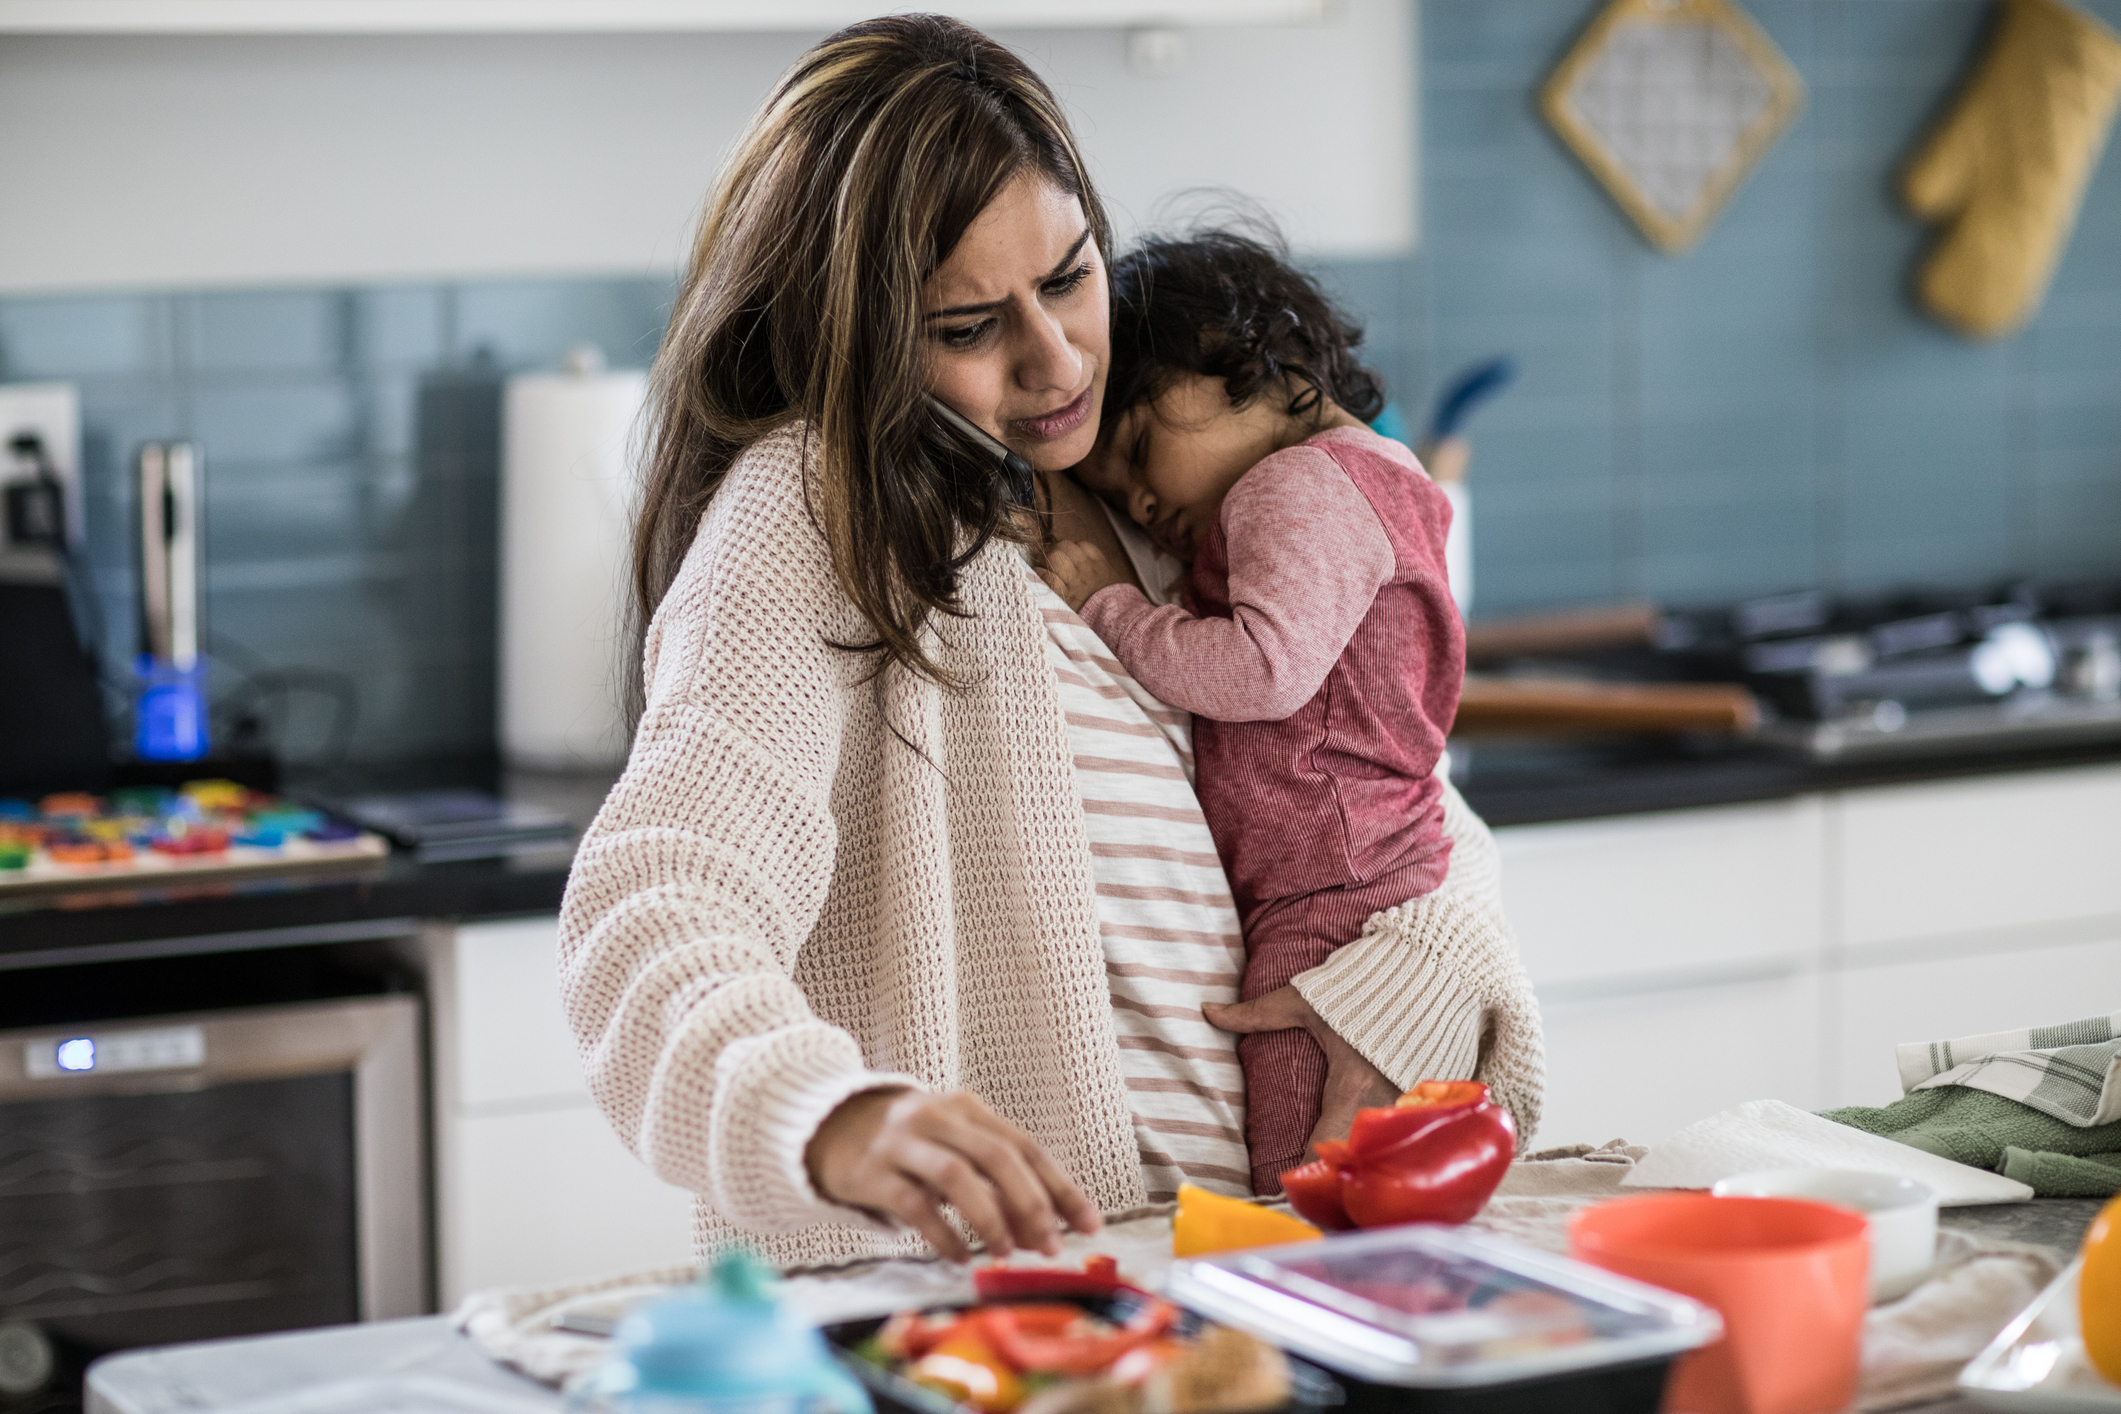 Woman preparing food while holding a toddler in a kitchen